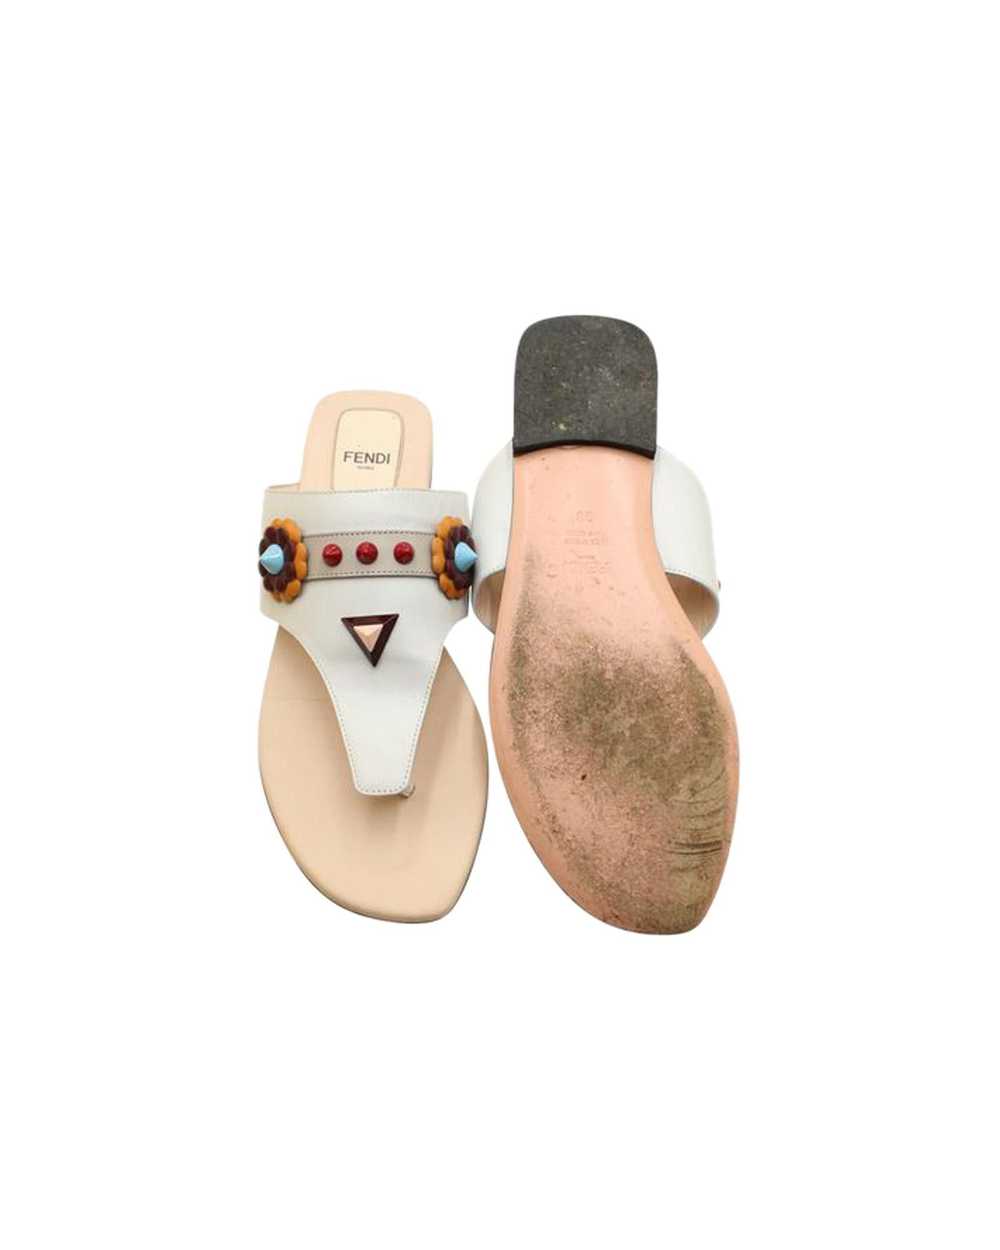 Fendi Leather Studded Thong Sandals from Italy - image 5